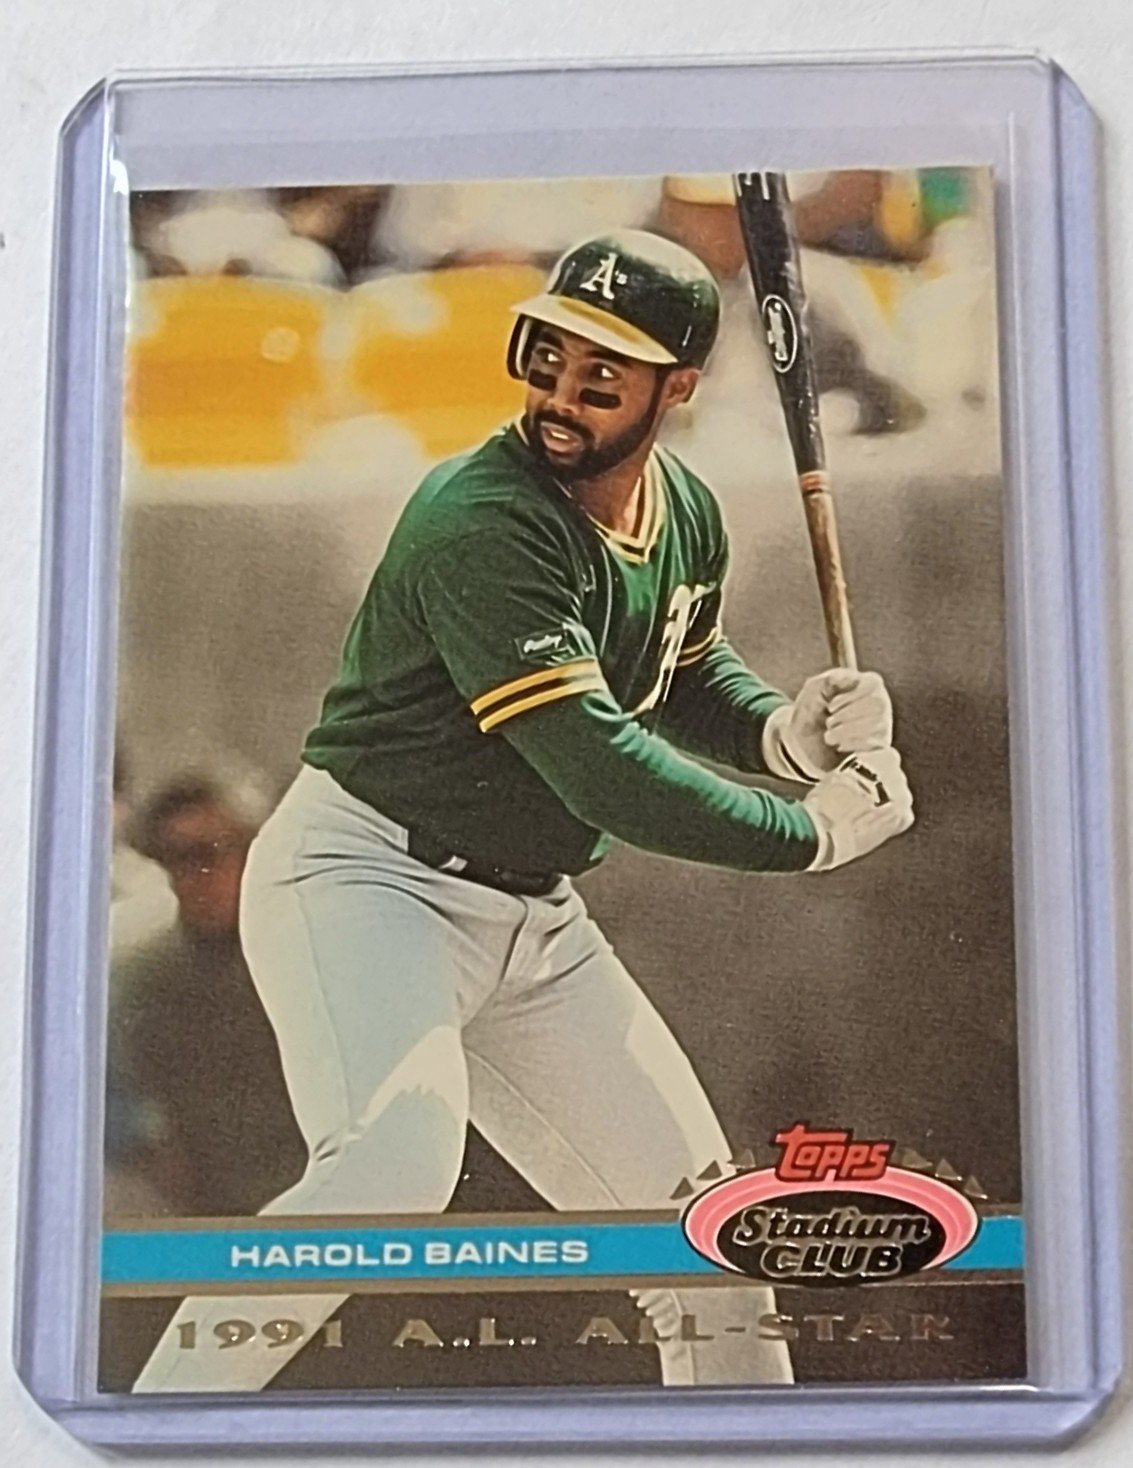 1992 Topps Stadium Club Dome Harold Baines 1991 All Star MLB Baseball Trading Card TPTV simple Xclusive Collectibles   